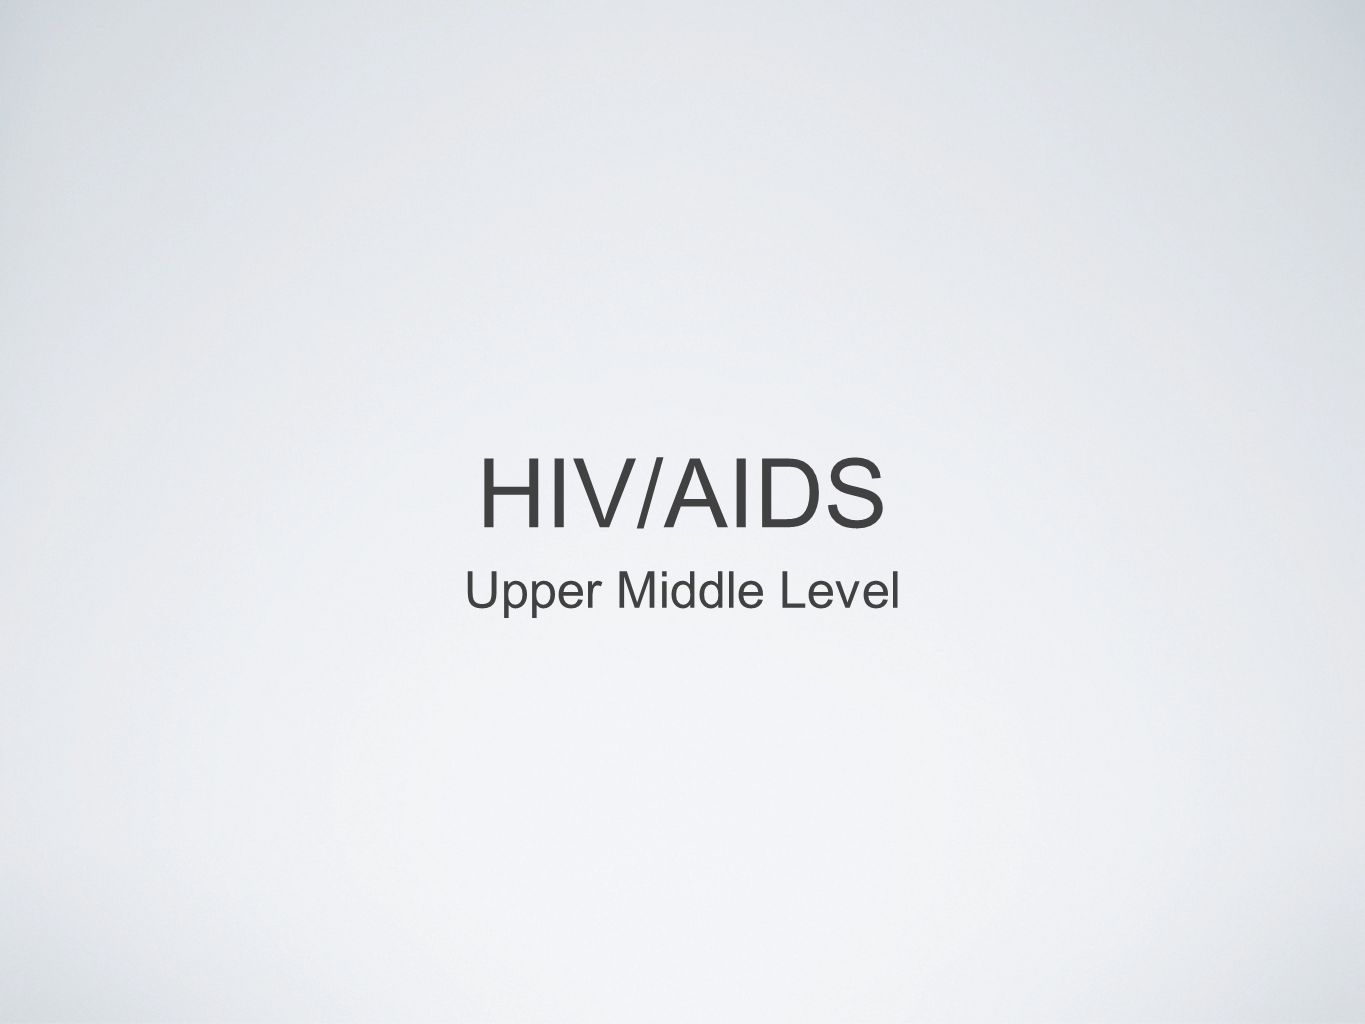 HIV/AIDS Upper Middle Level